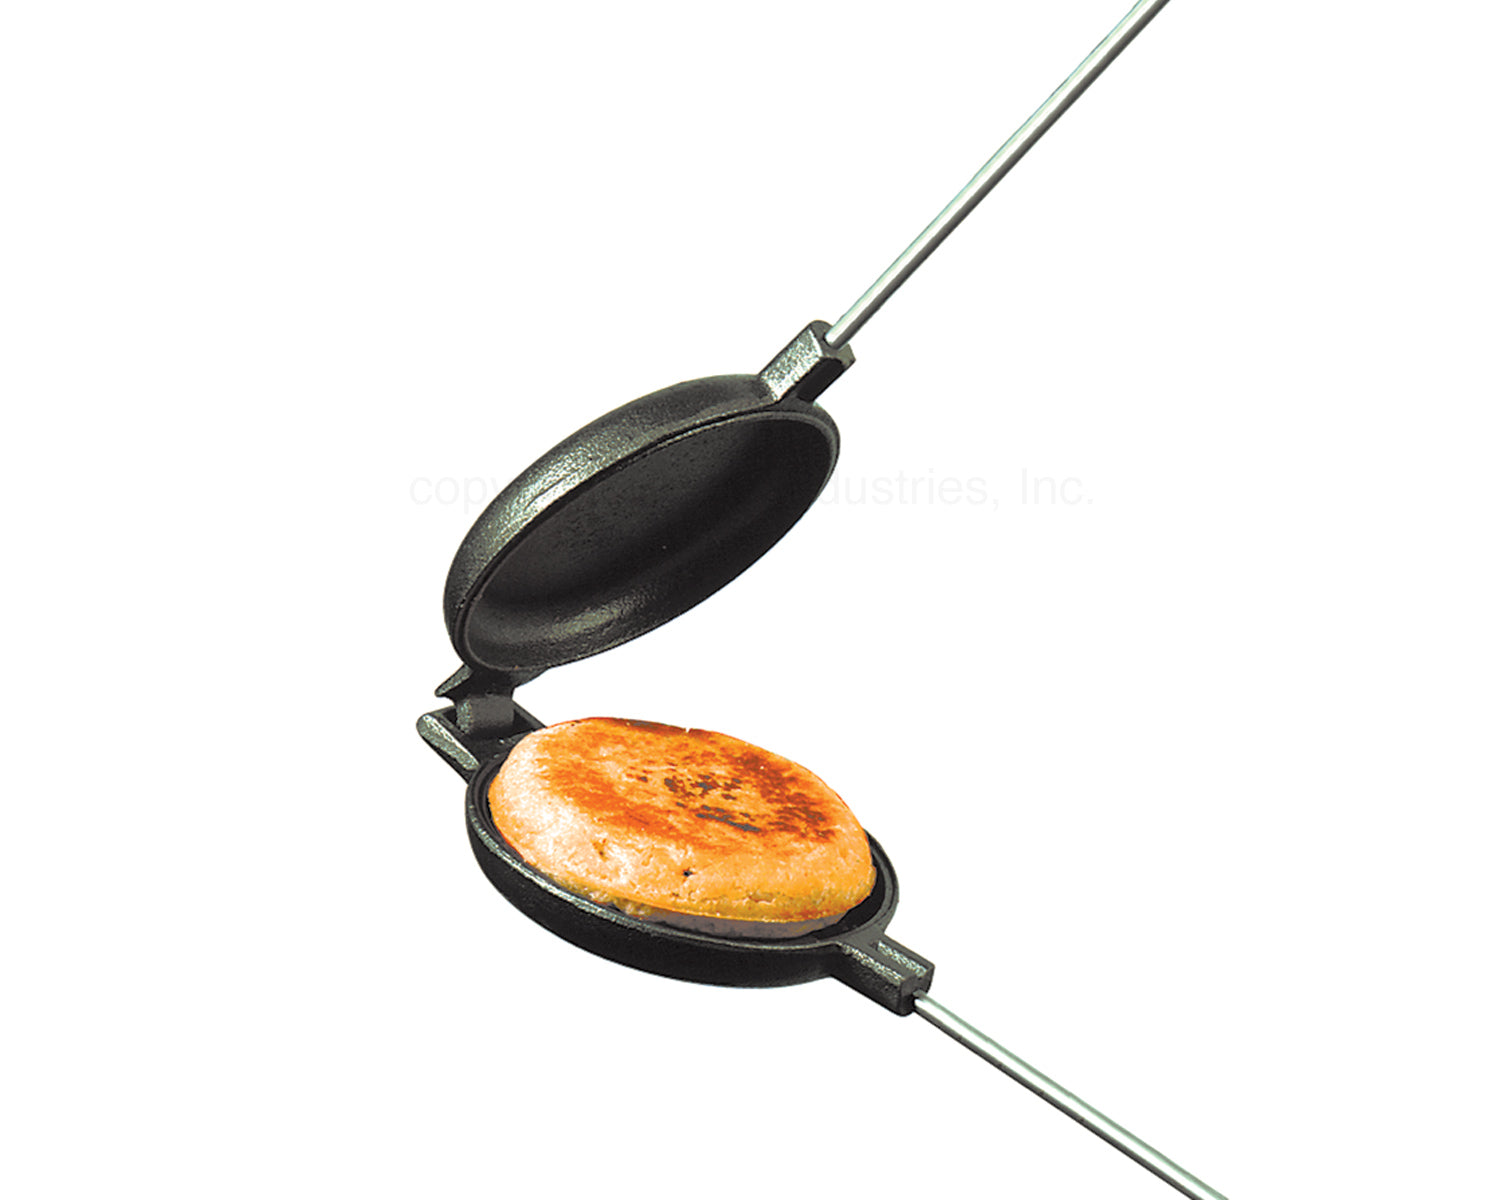 Old Mountain Pre Seasoned Round Pie Iron, 28 Inch Long – The Total